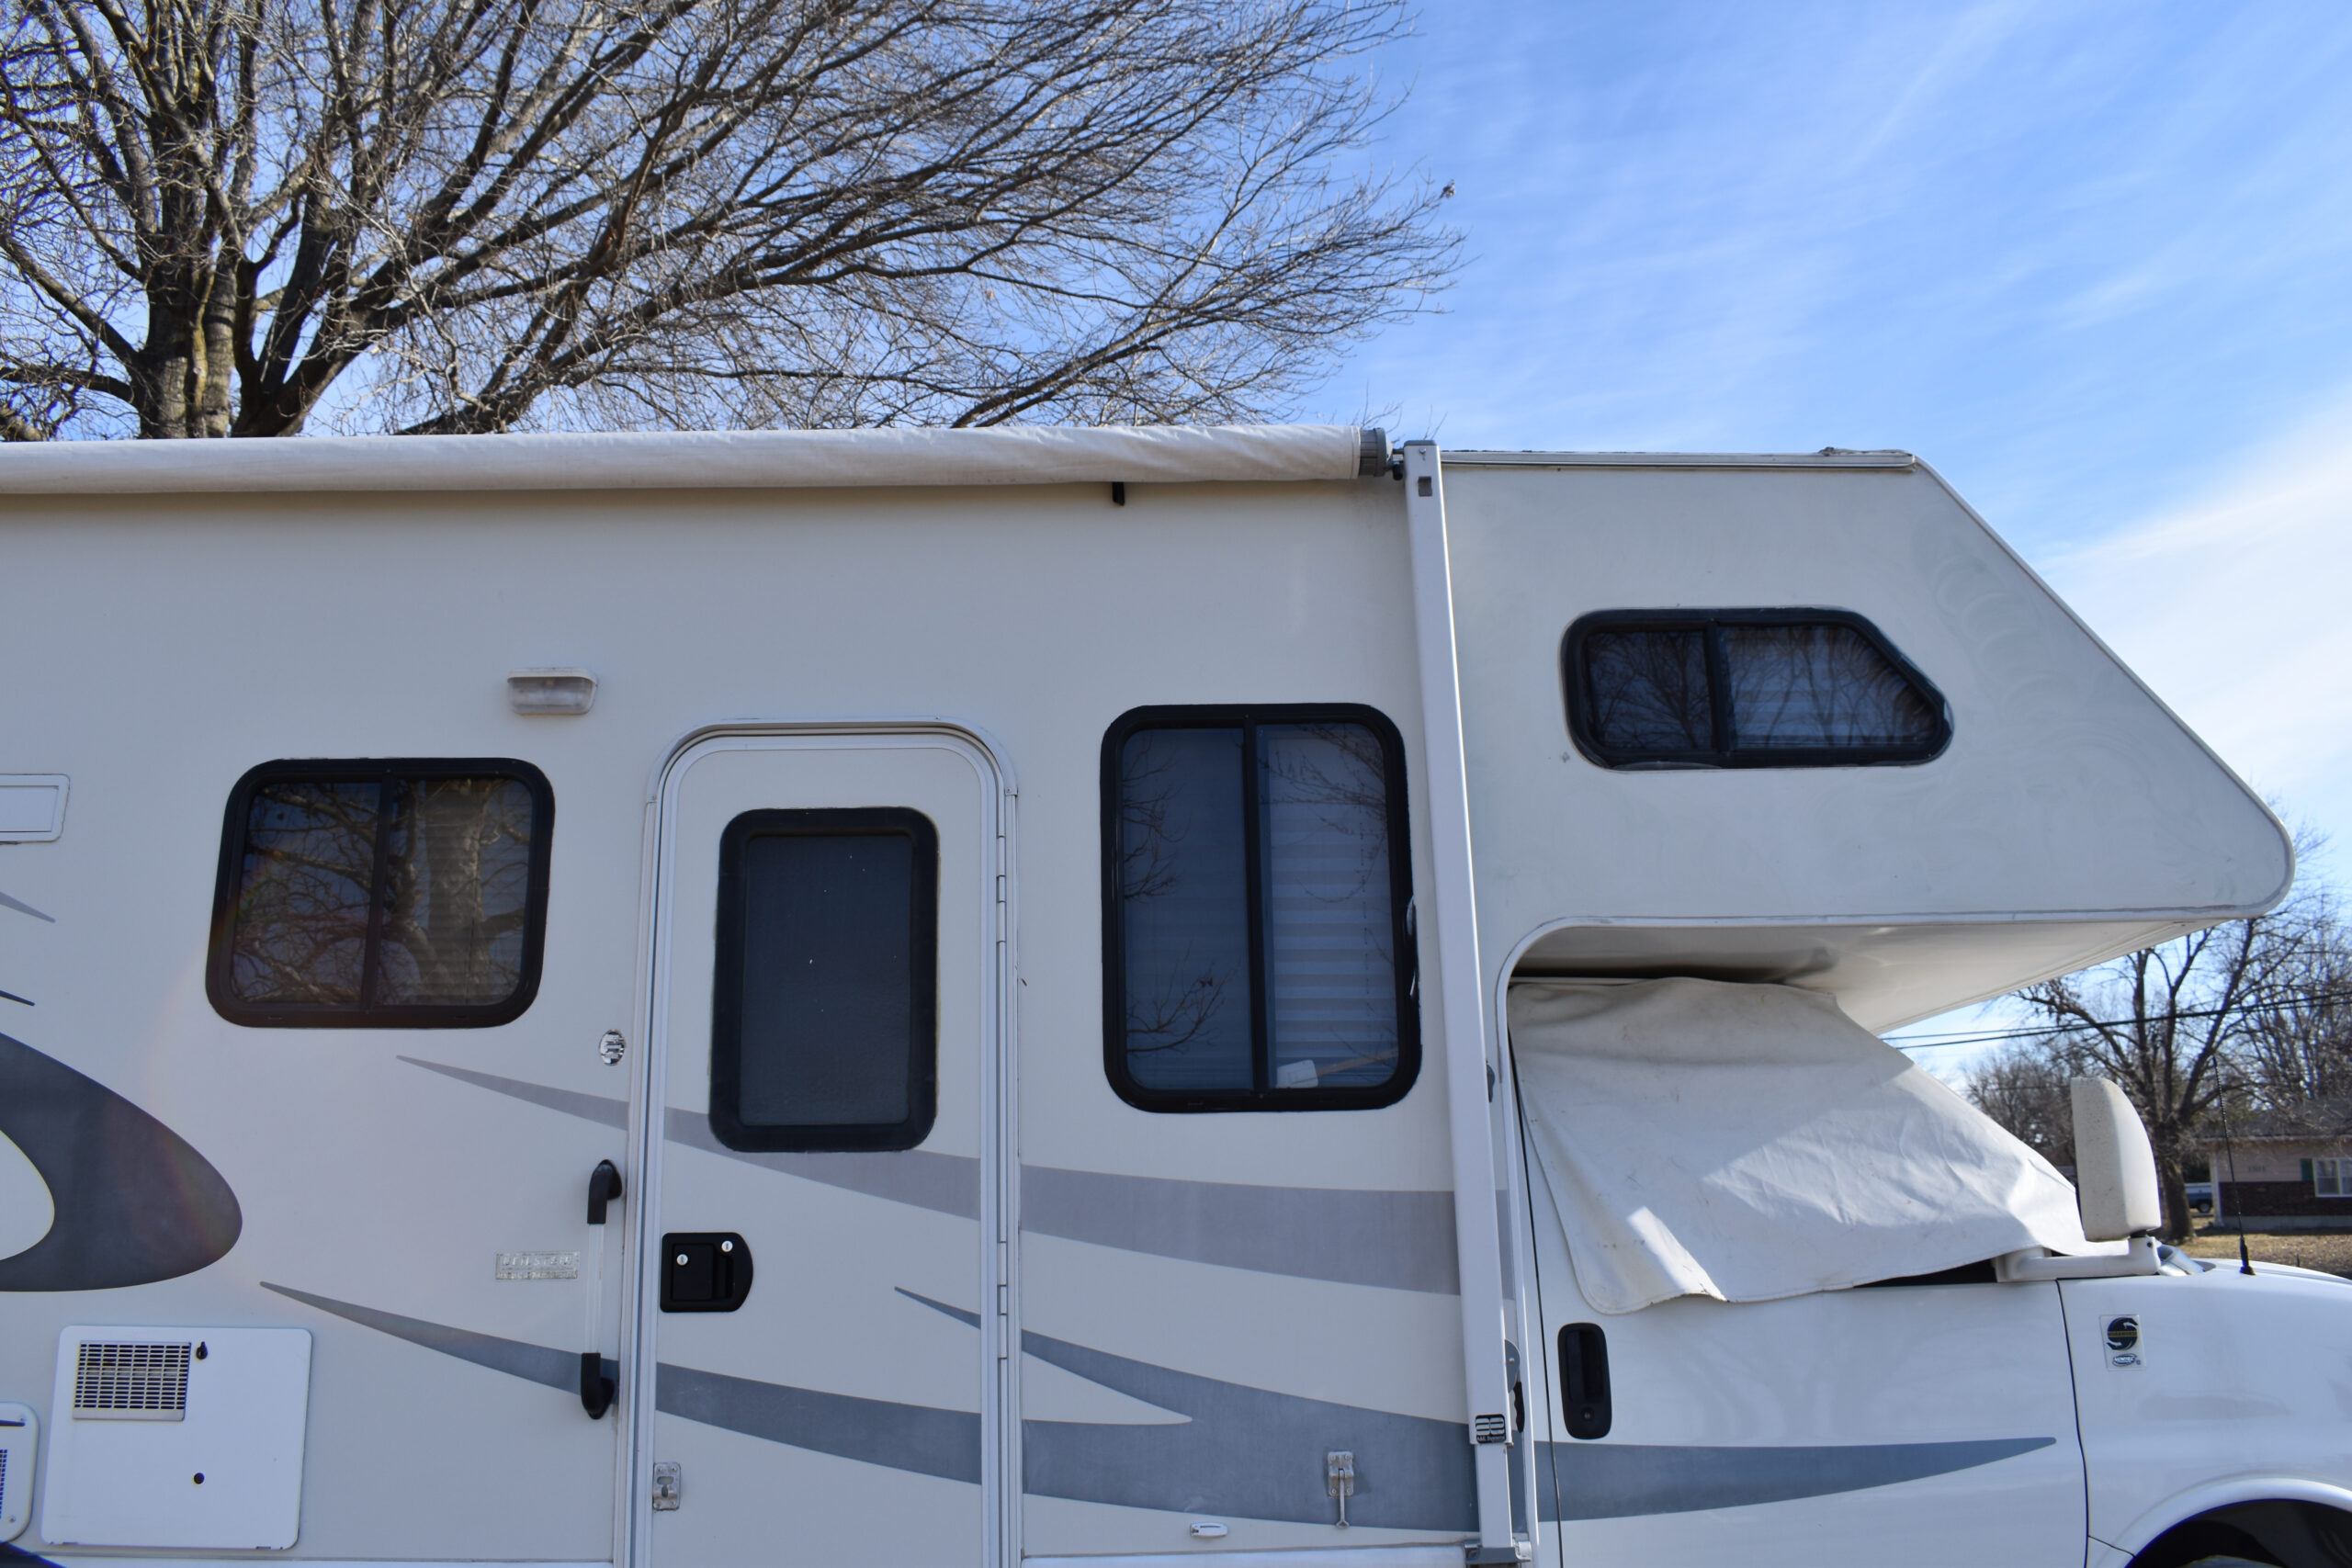 side view of RV motorhome - feature image for How To Drill Out An RV Lock